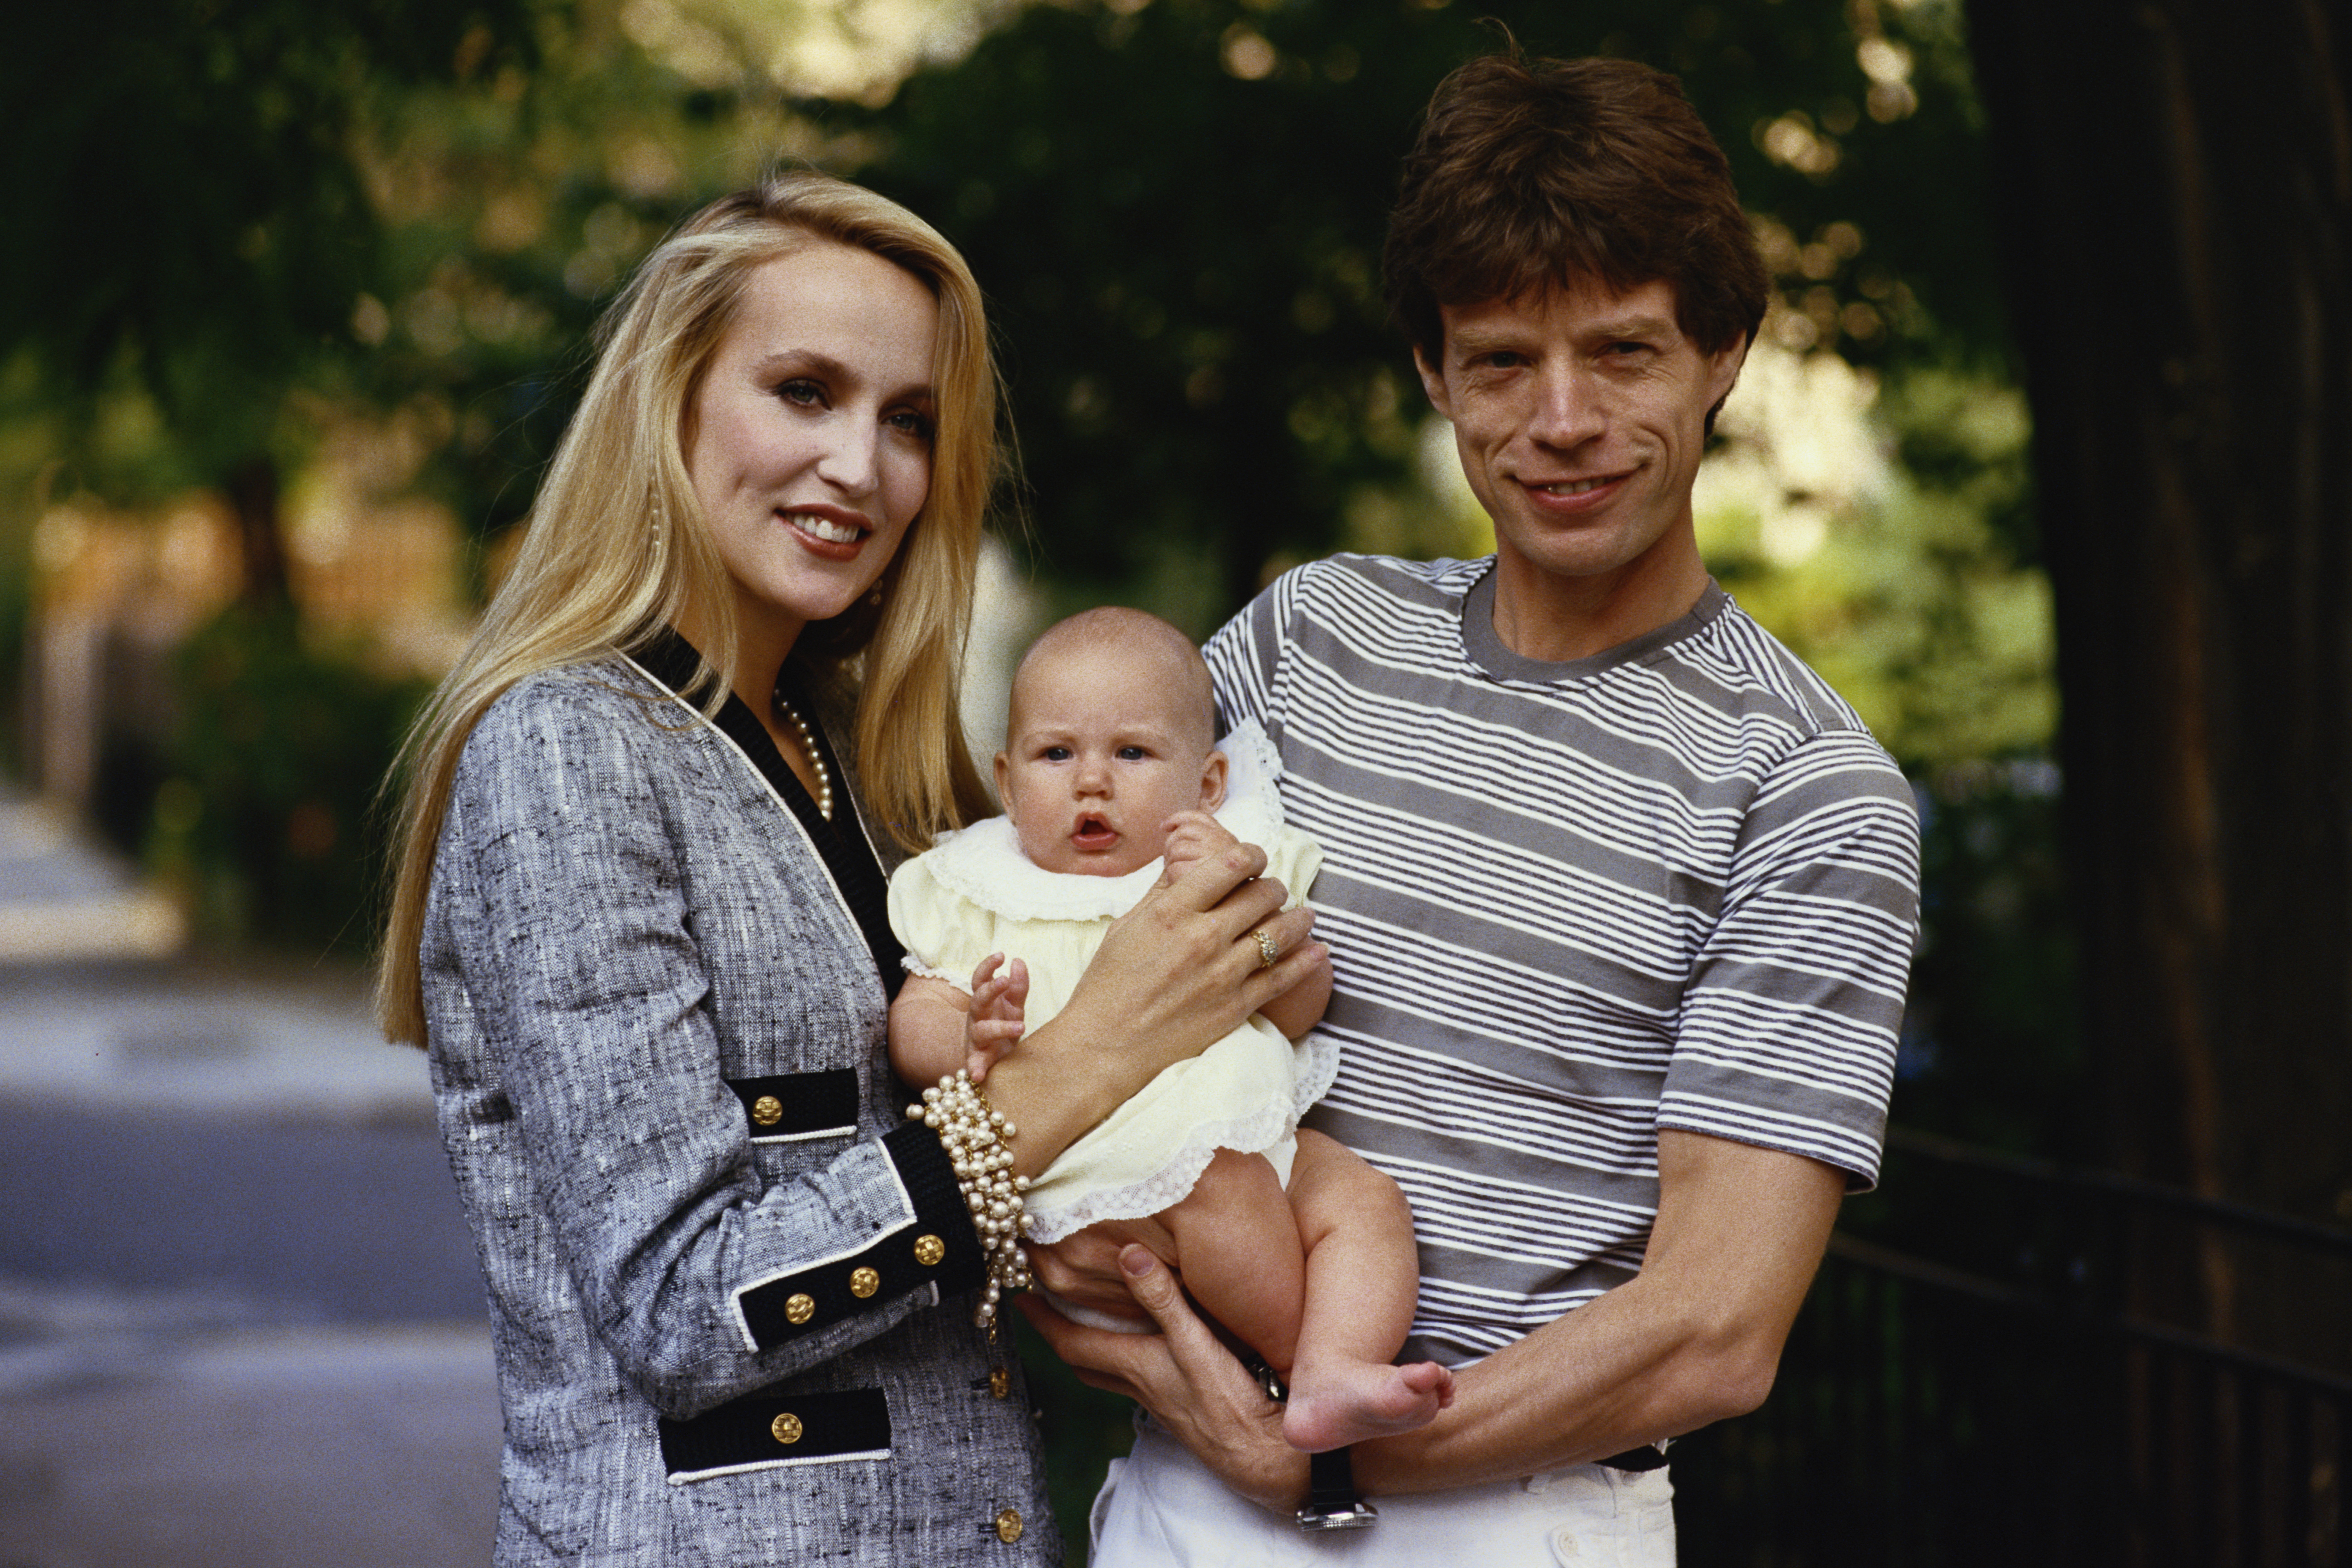 Mick Jagger and Jerry Hall with one of their children, circa 1990 | Source: Getty Images